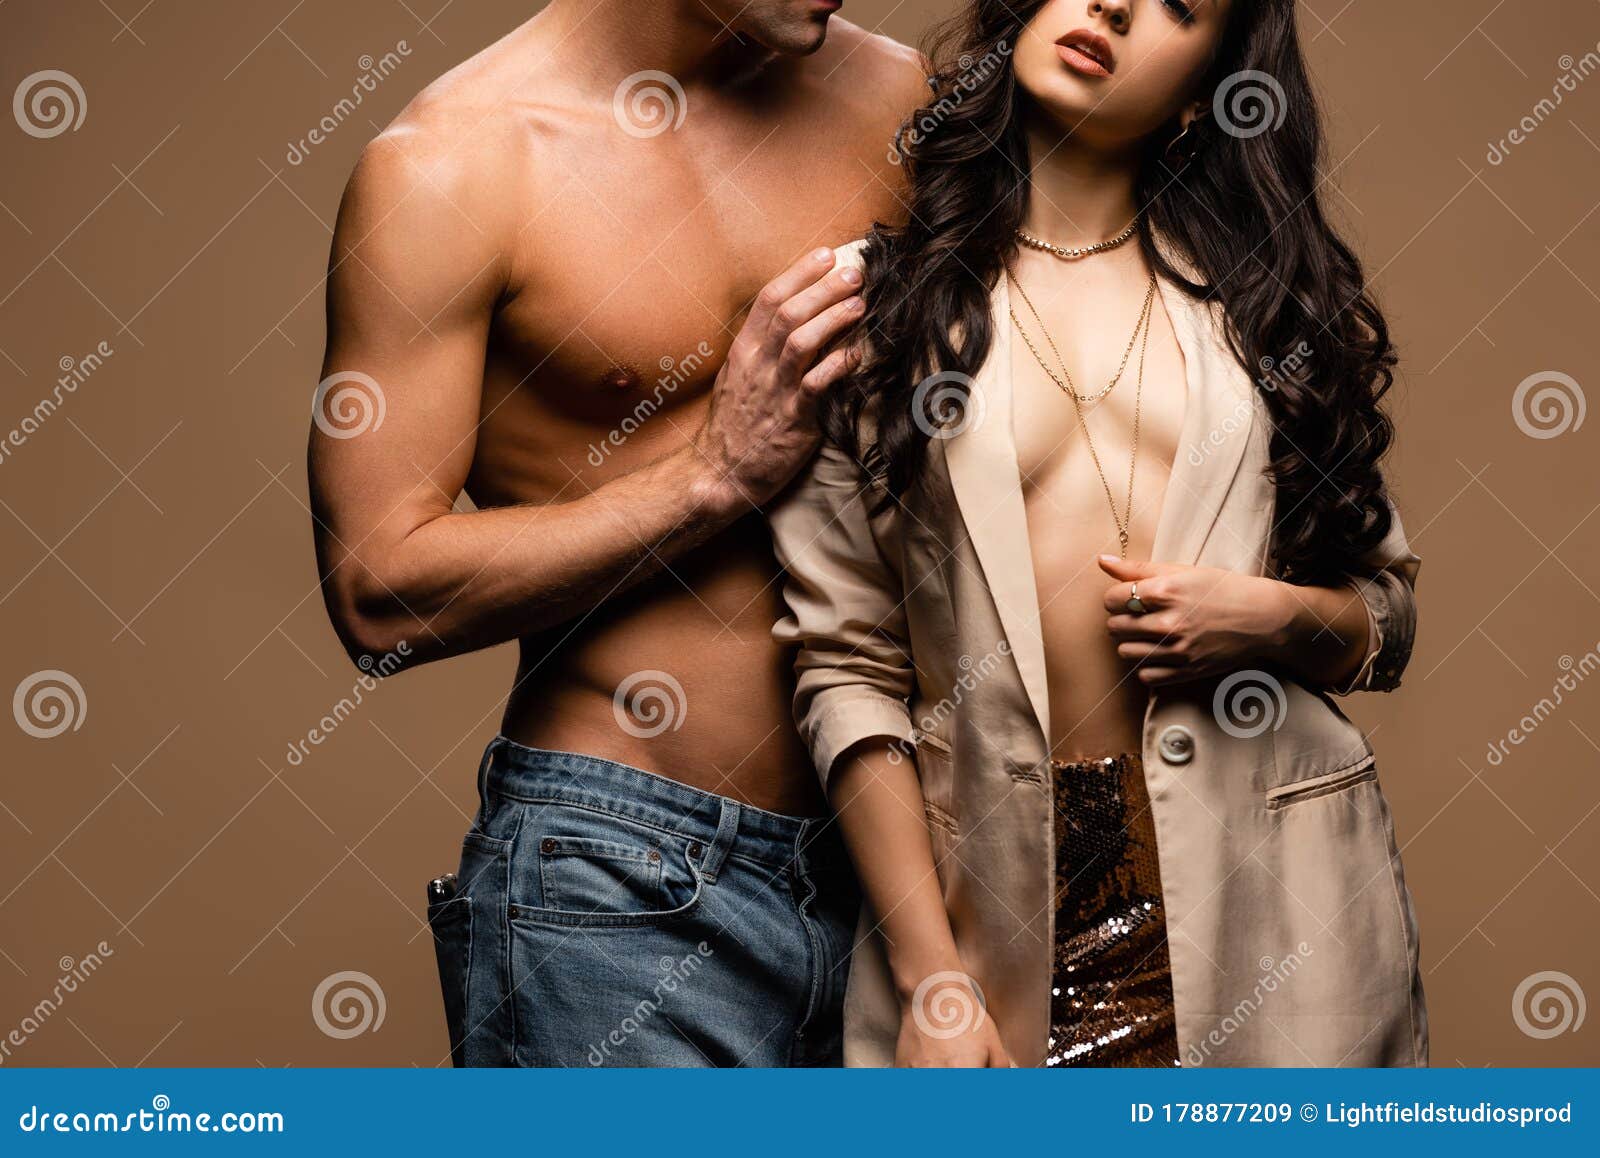 View of Shirtless Boyfriend Hugging Half Naked Girlfriend in Beige Jacket Isolated on Beige Stock Image picture